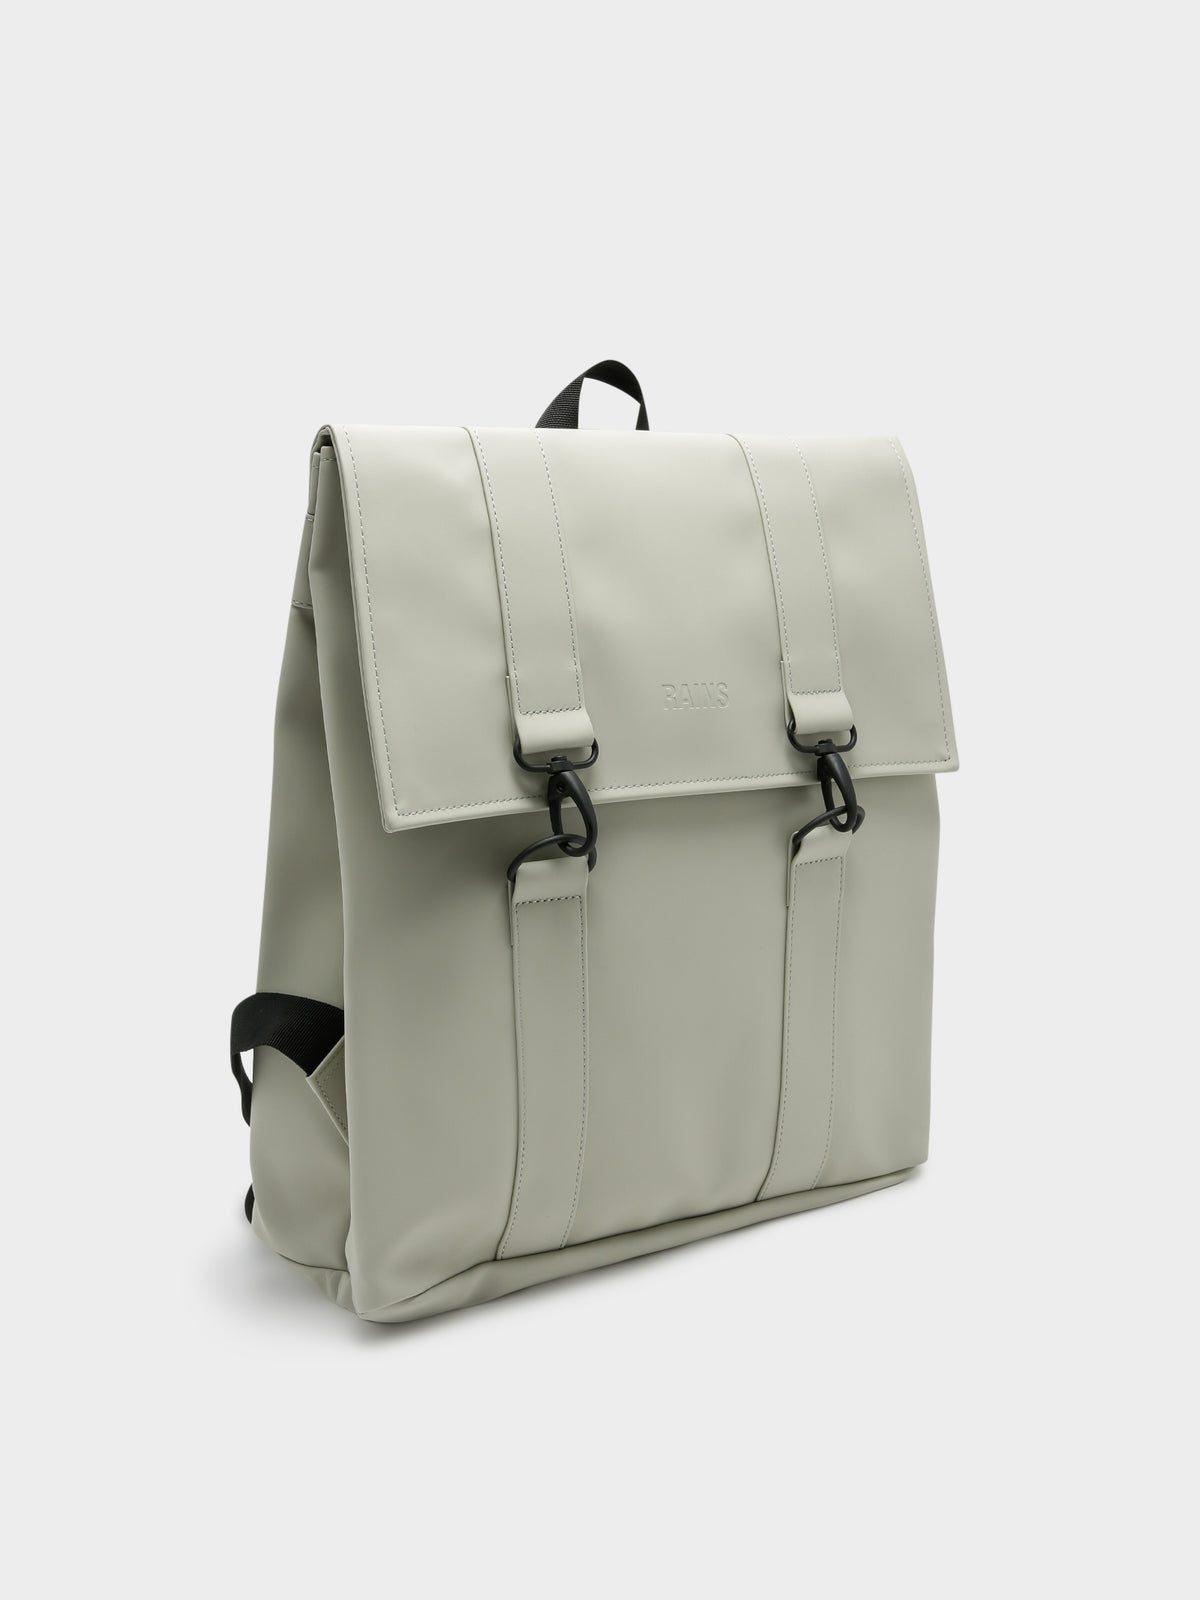 MSN Backpack in Cement Grey